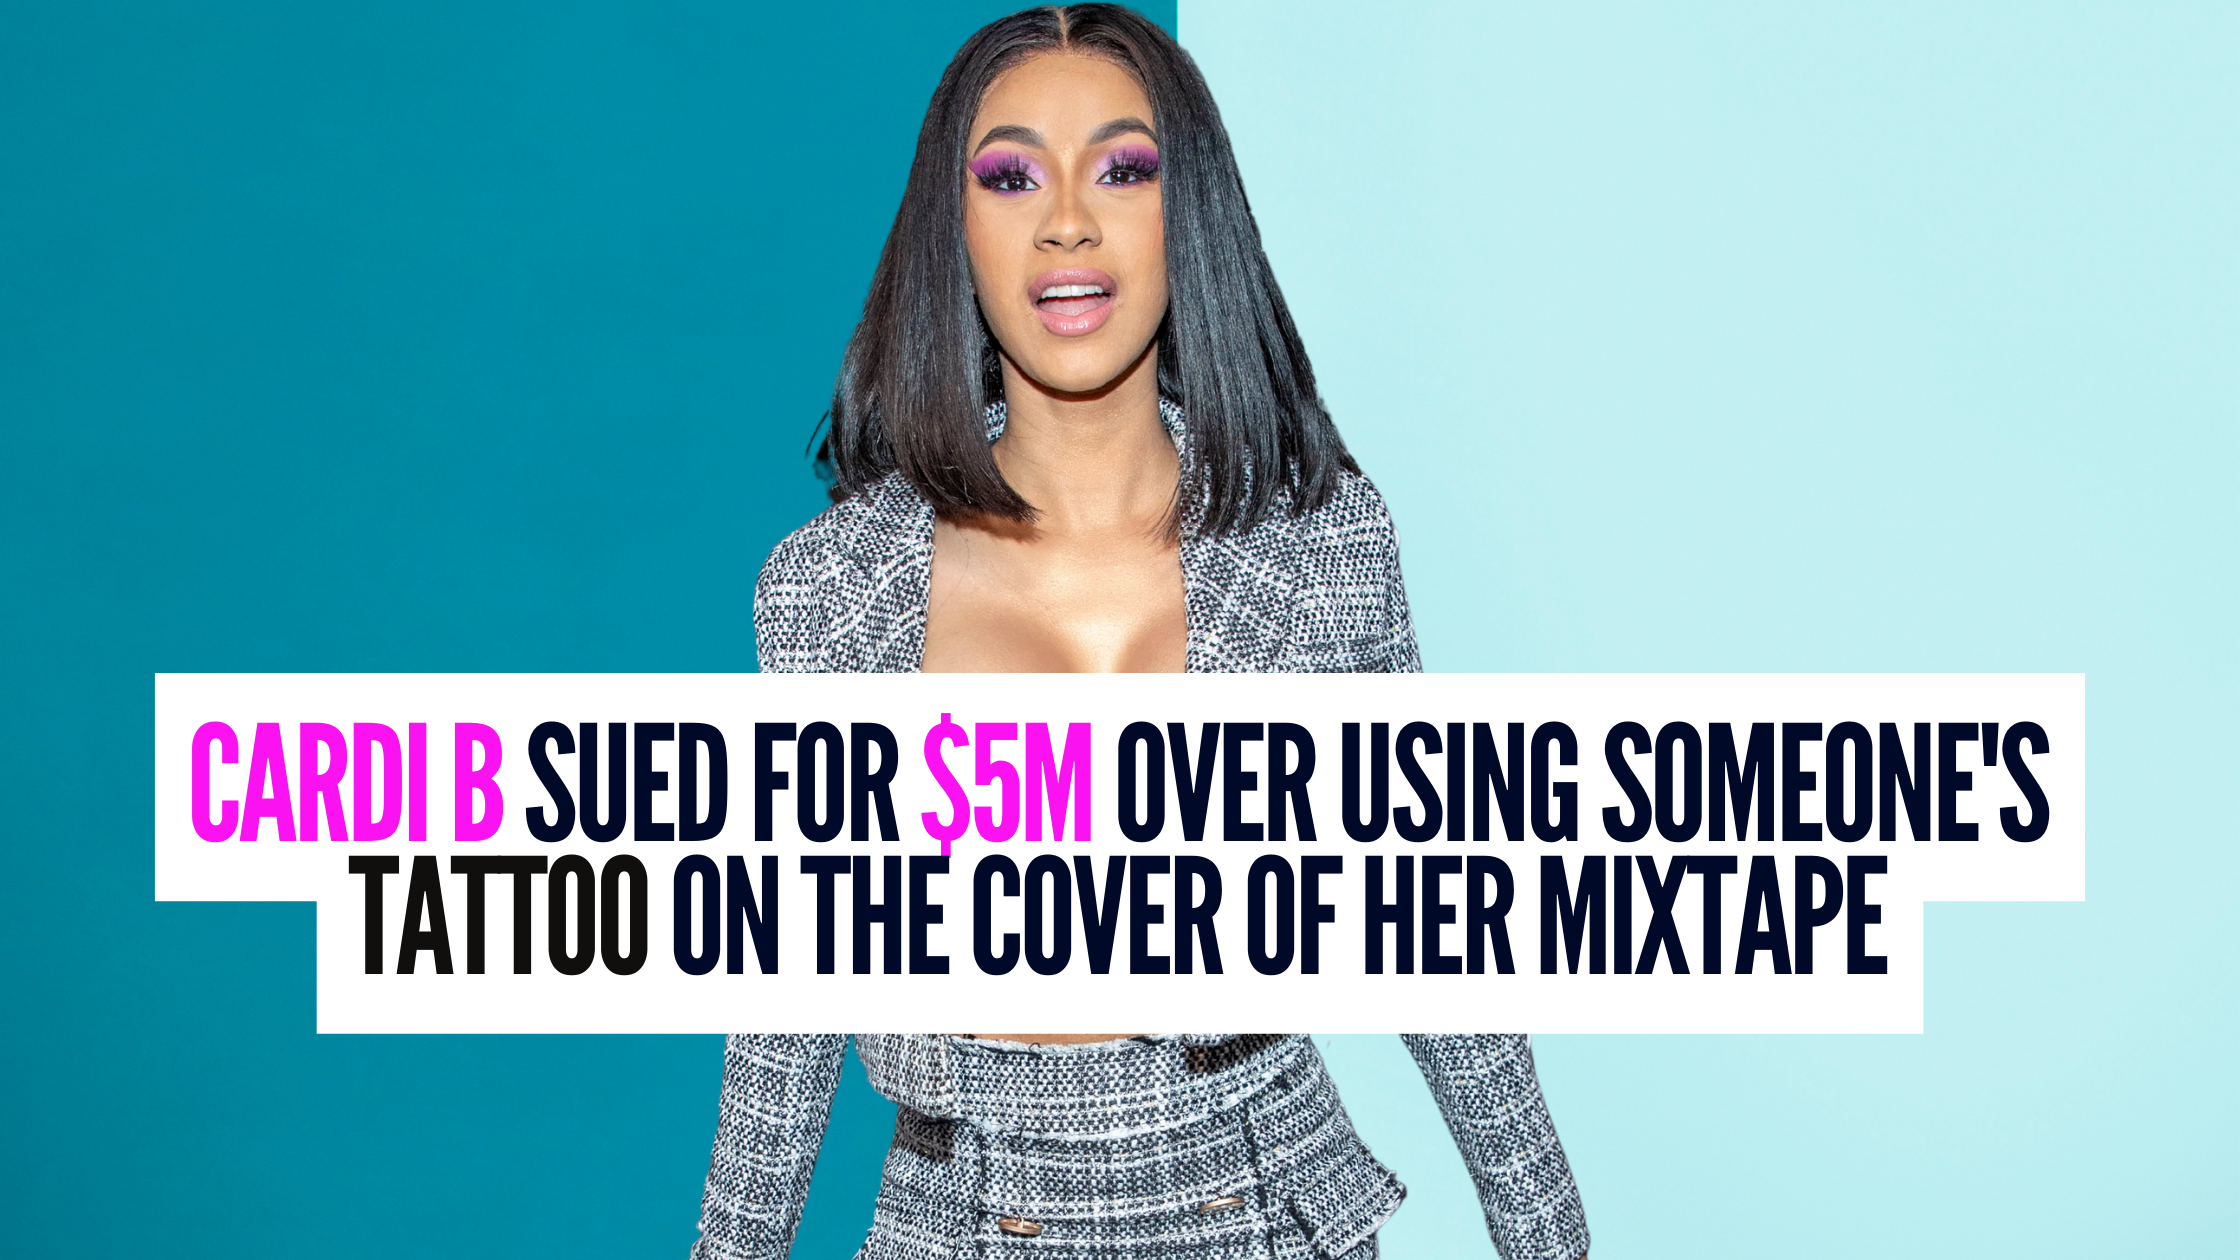 Cardi B Sued for $5M over the use of a Tattoo on the Cover of her Mixtape. 